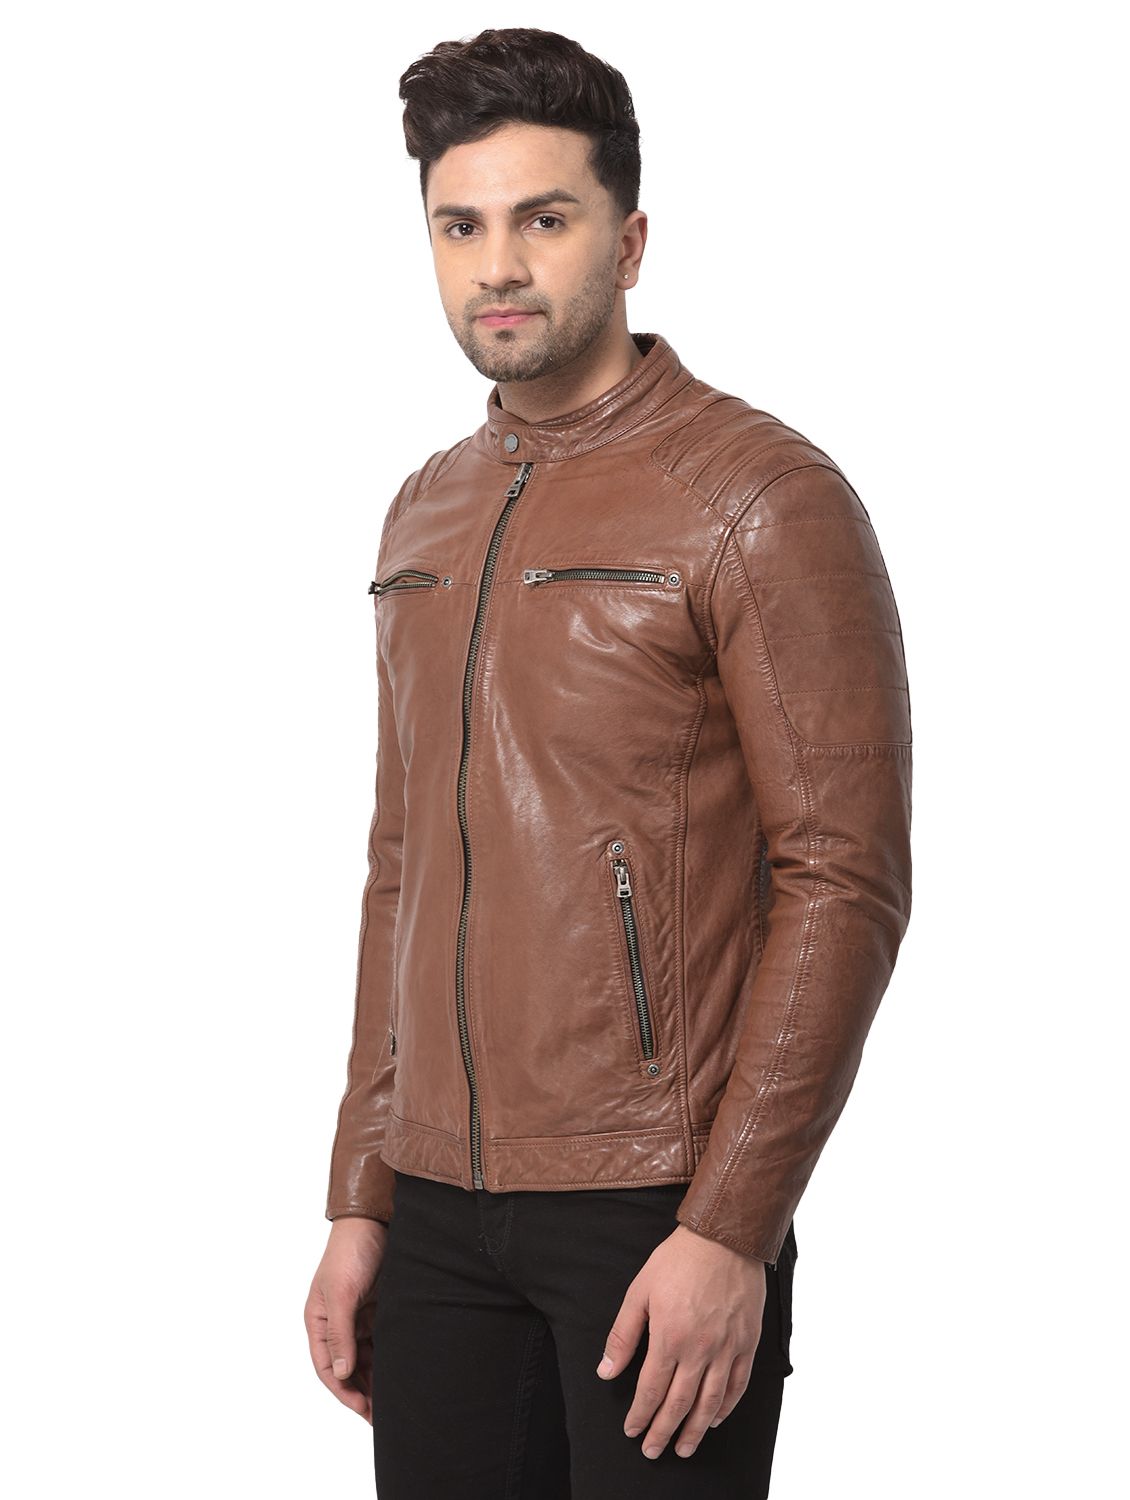 Buy INAYA LEATHER Men's Simple & Stylish Pure Genuine Leather Jacket (Size  : XS,Color: Tan) at Amazon.in